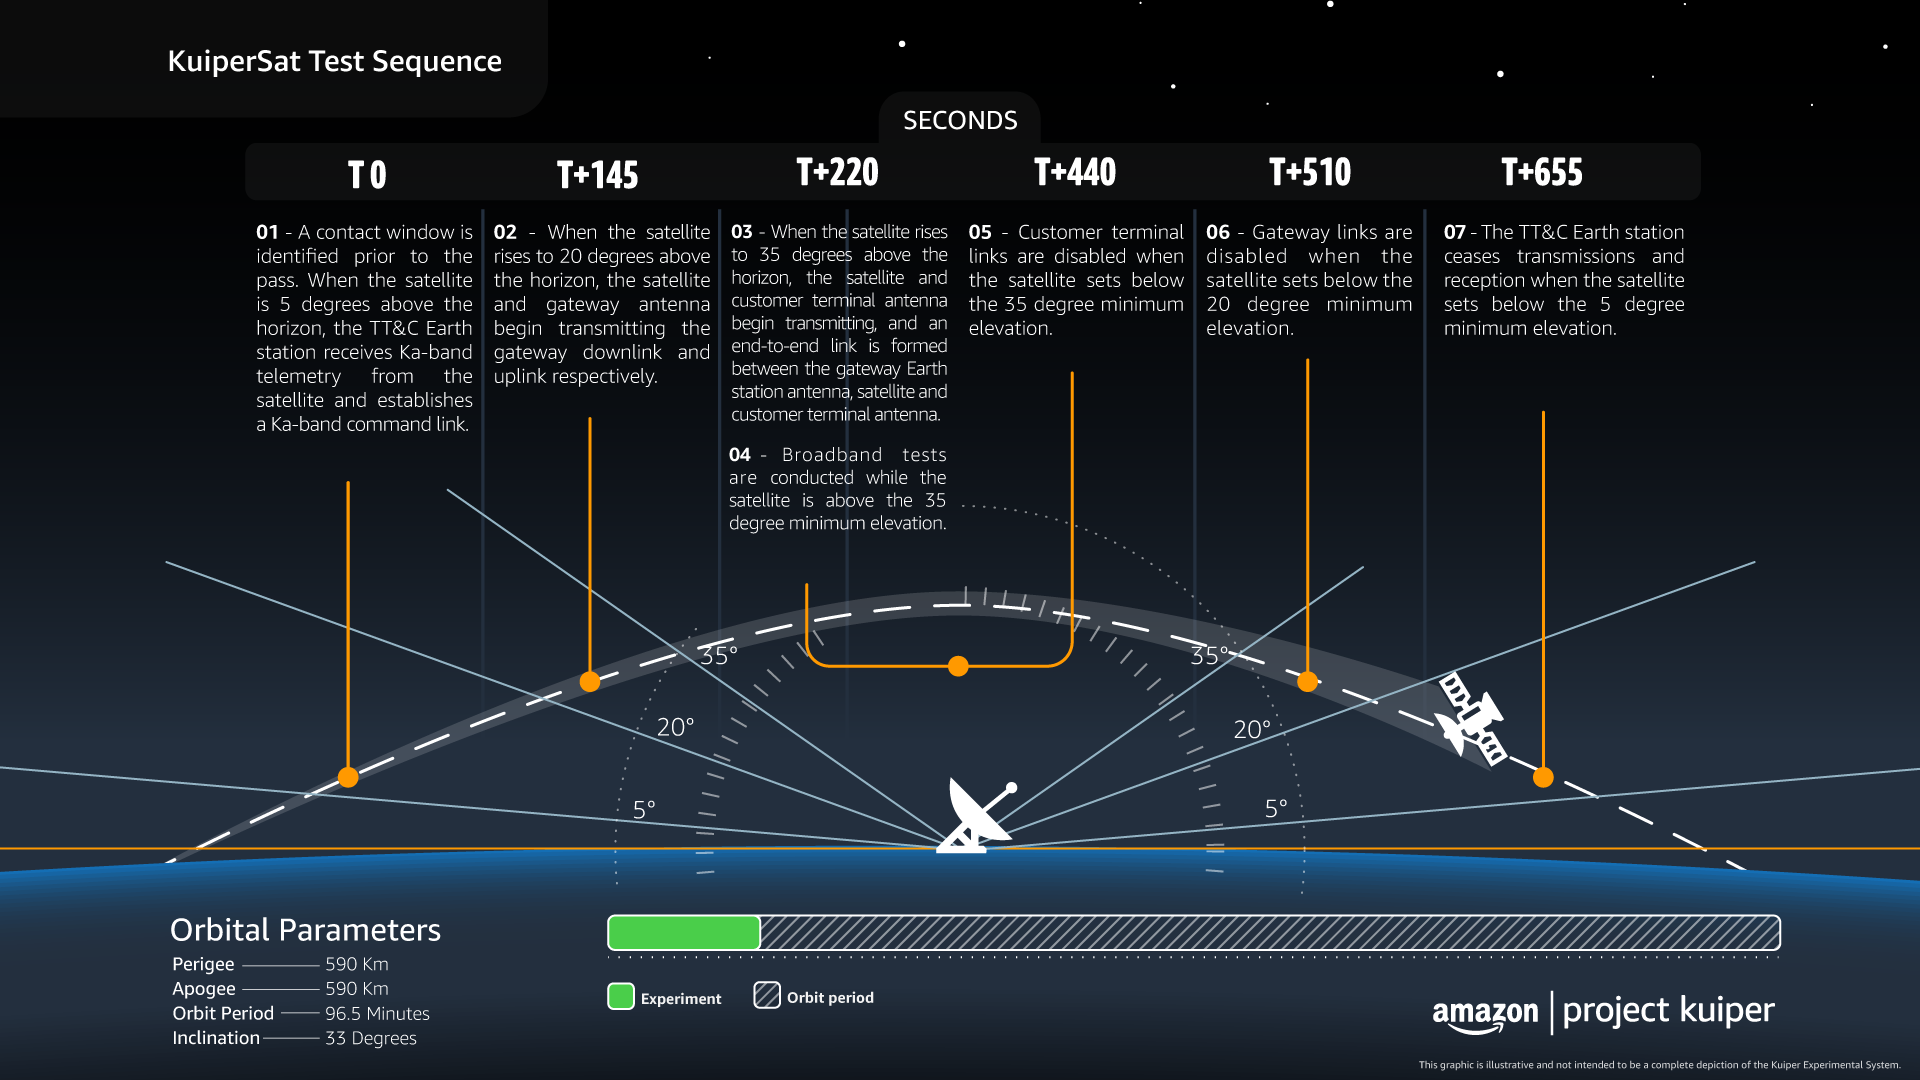 Amazon explains the test sequence for its satellite prototypes.